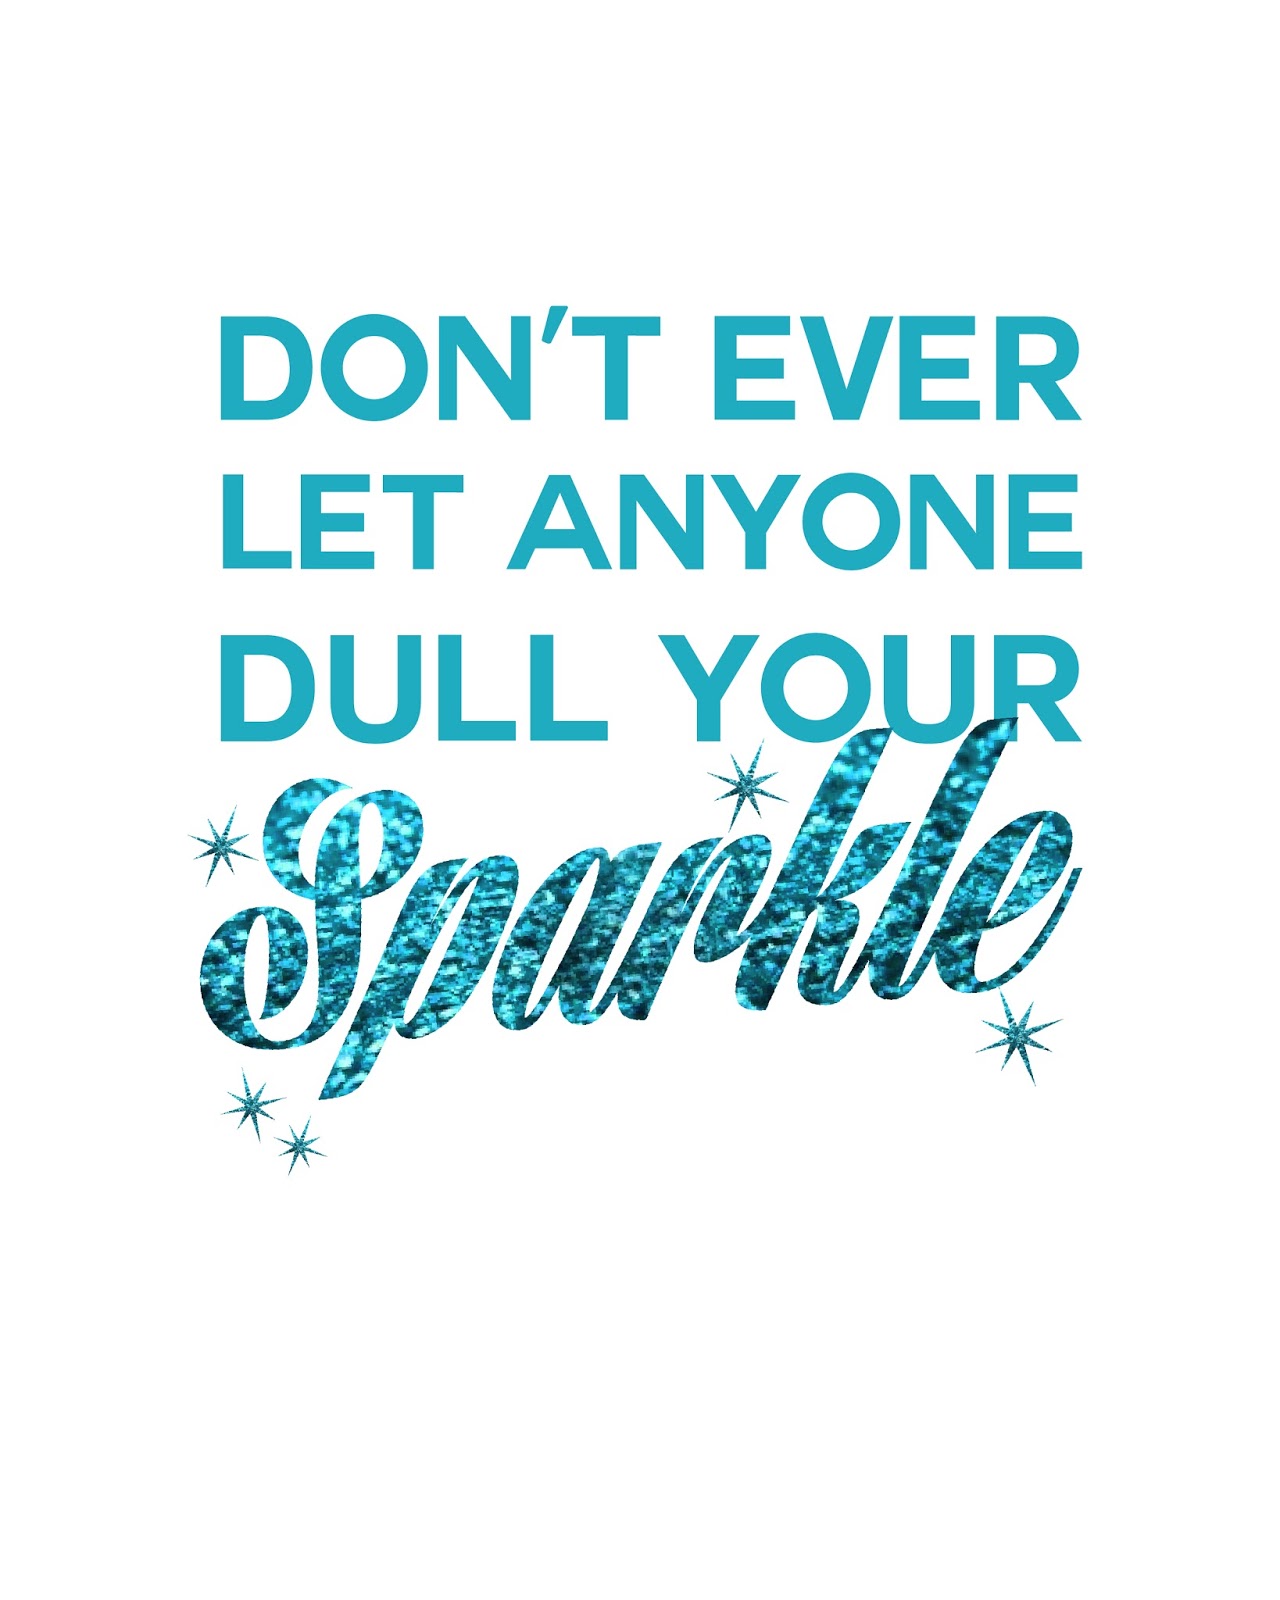 Freebies // don’t ever let anyone dull your sparkle.